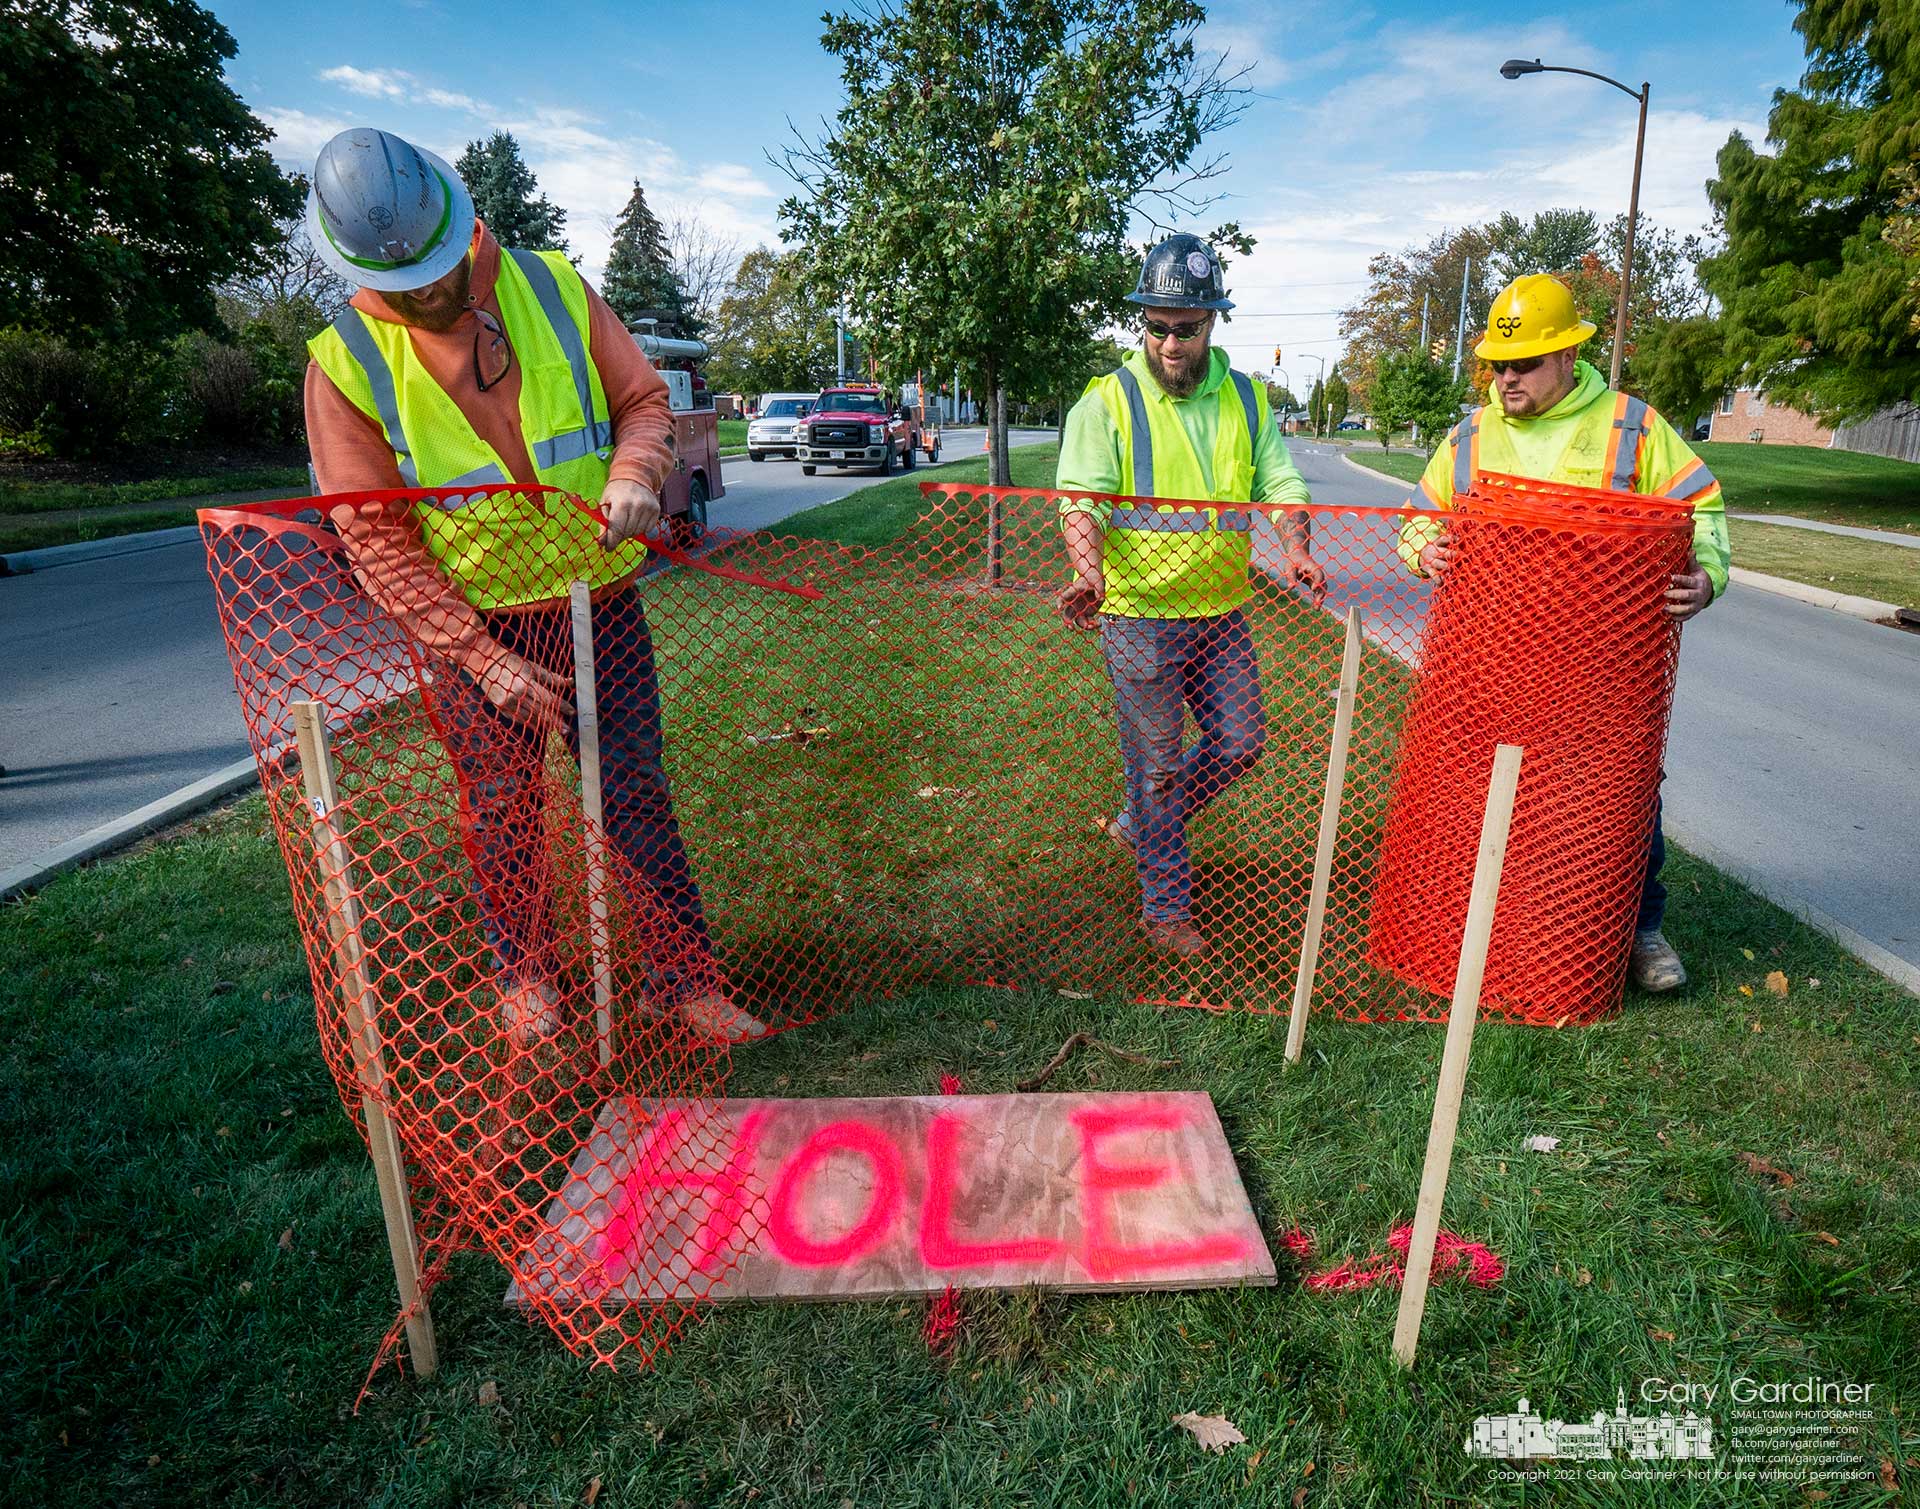 Workers mark the location of a hole bored into a median island on Huber Village Blvd. to mark underground utilities that may interfere with concrete pillars for new street lights. My Final Photo for Oct. 28, 2021.